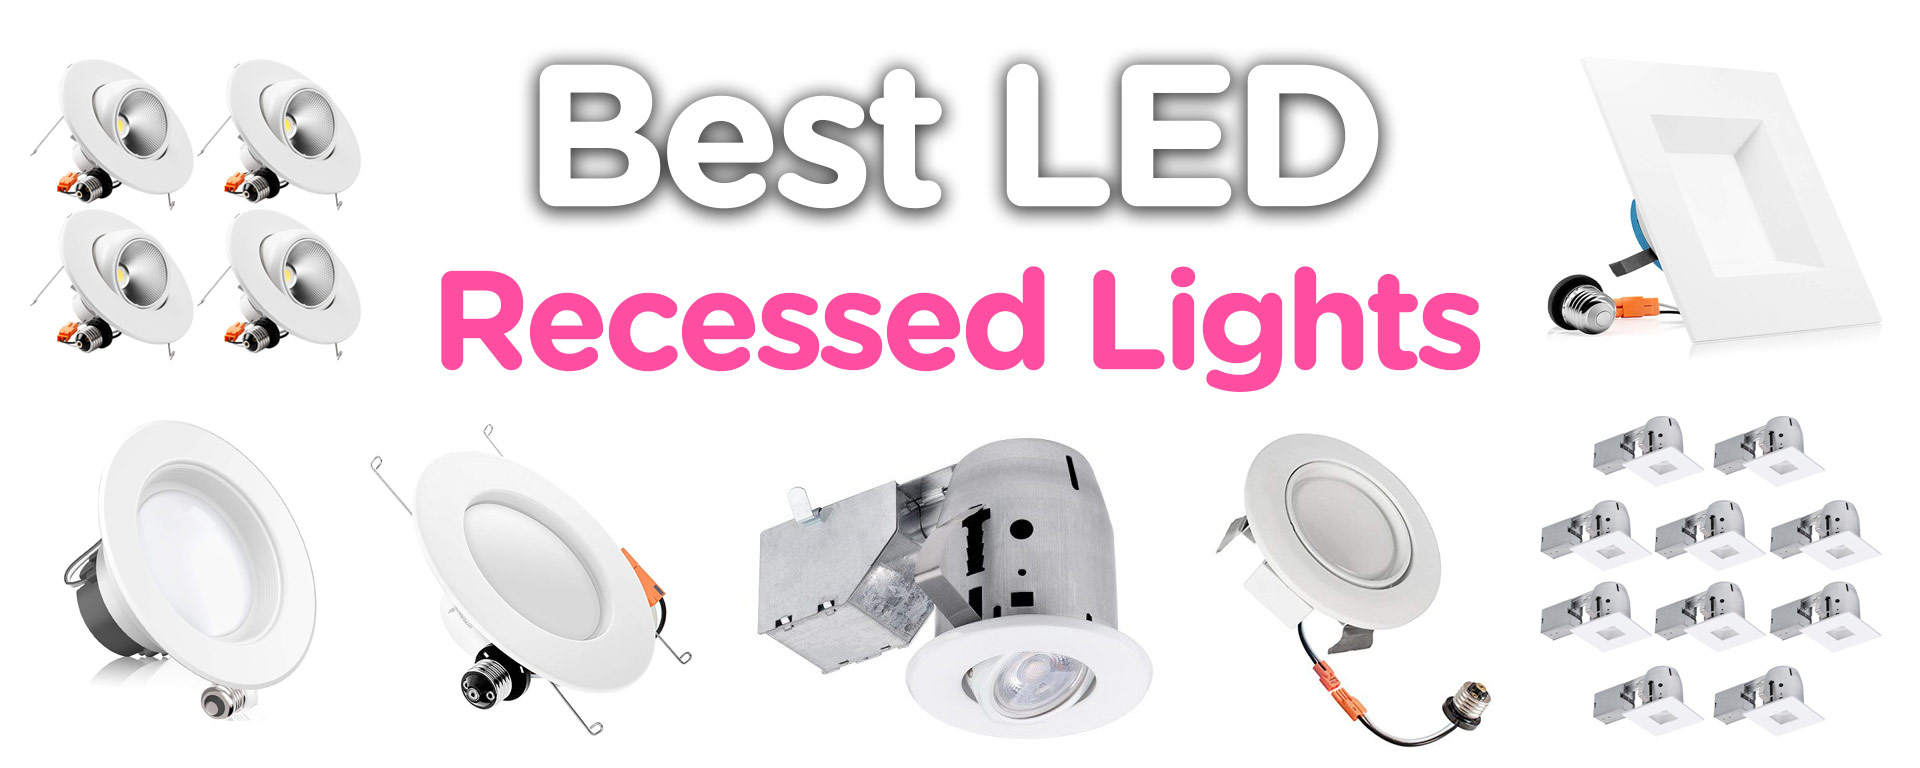 Best LED Recessed Lights Reviews & Buying Guide